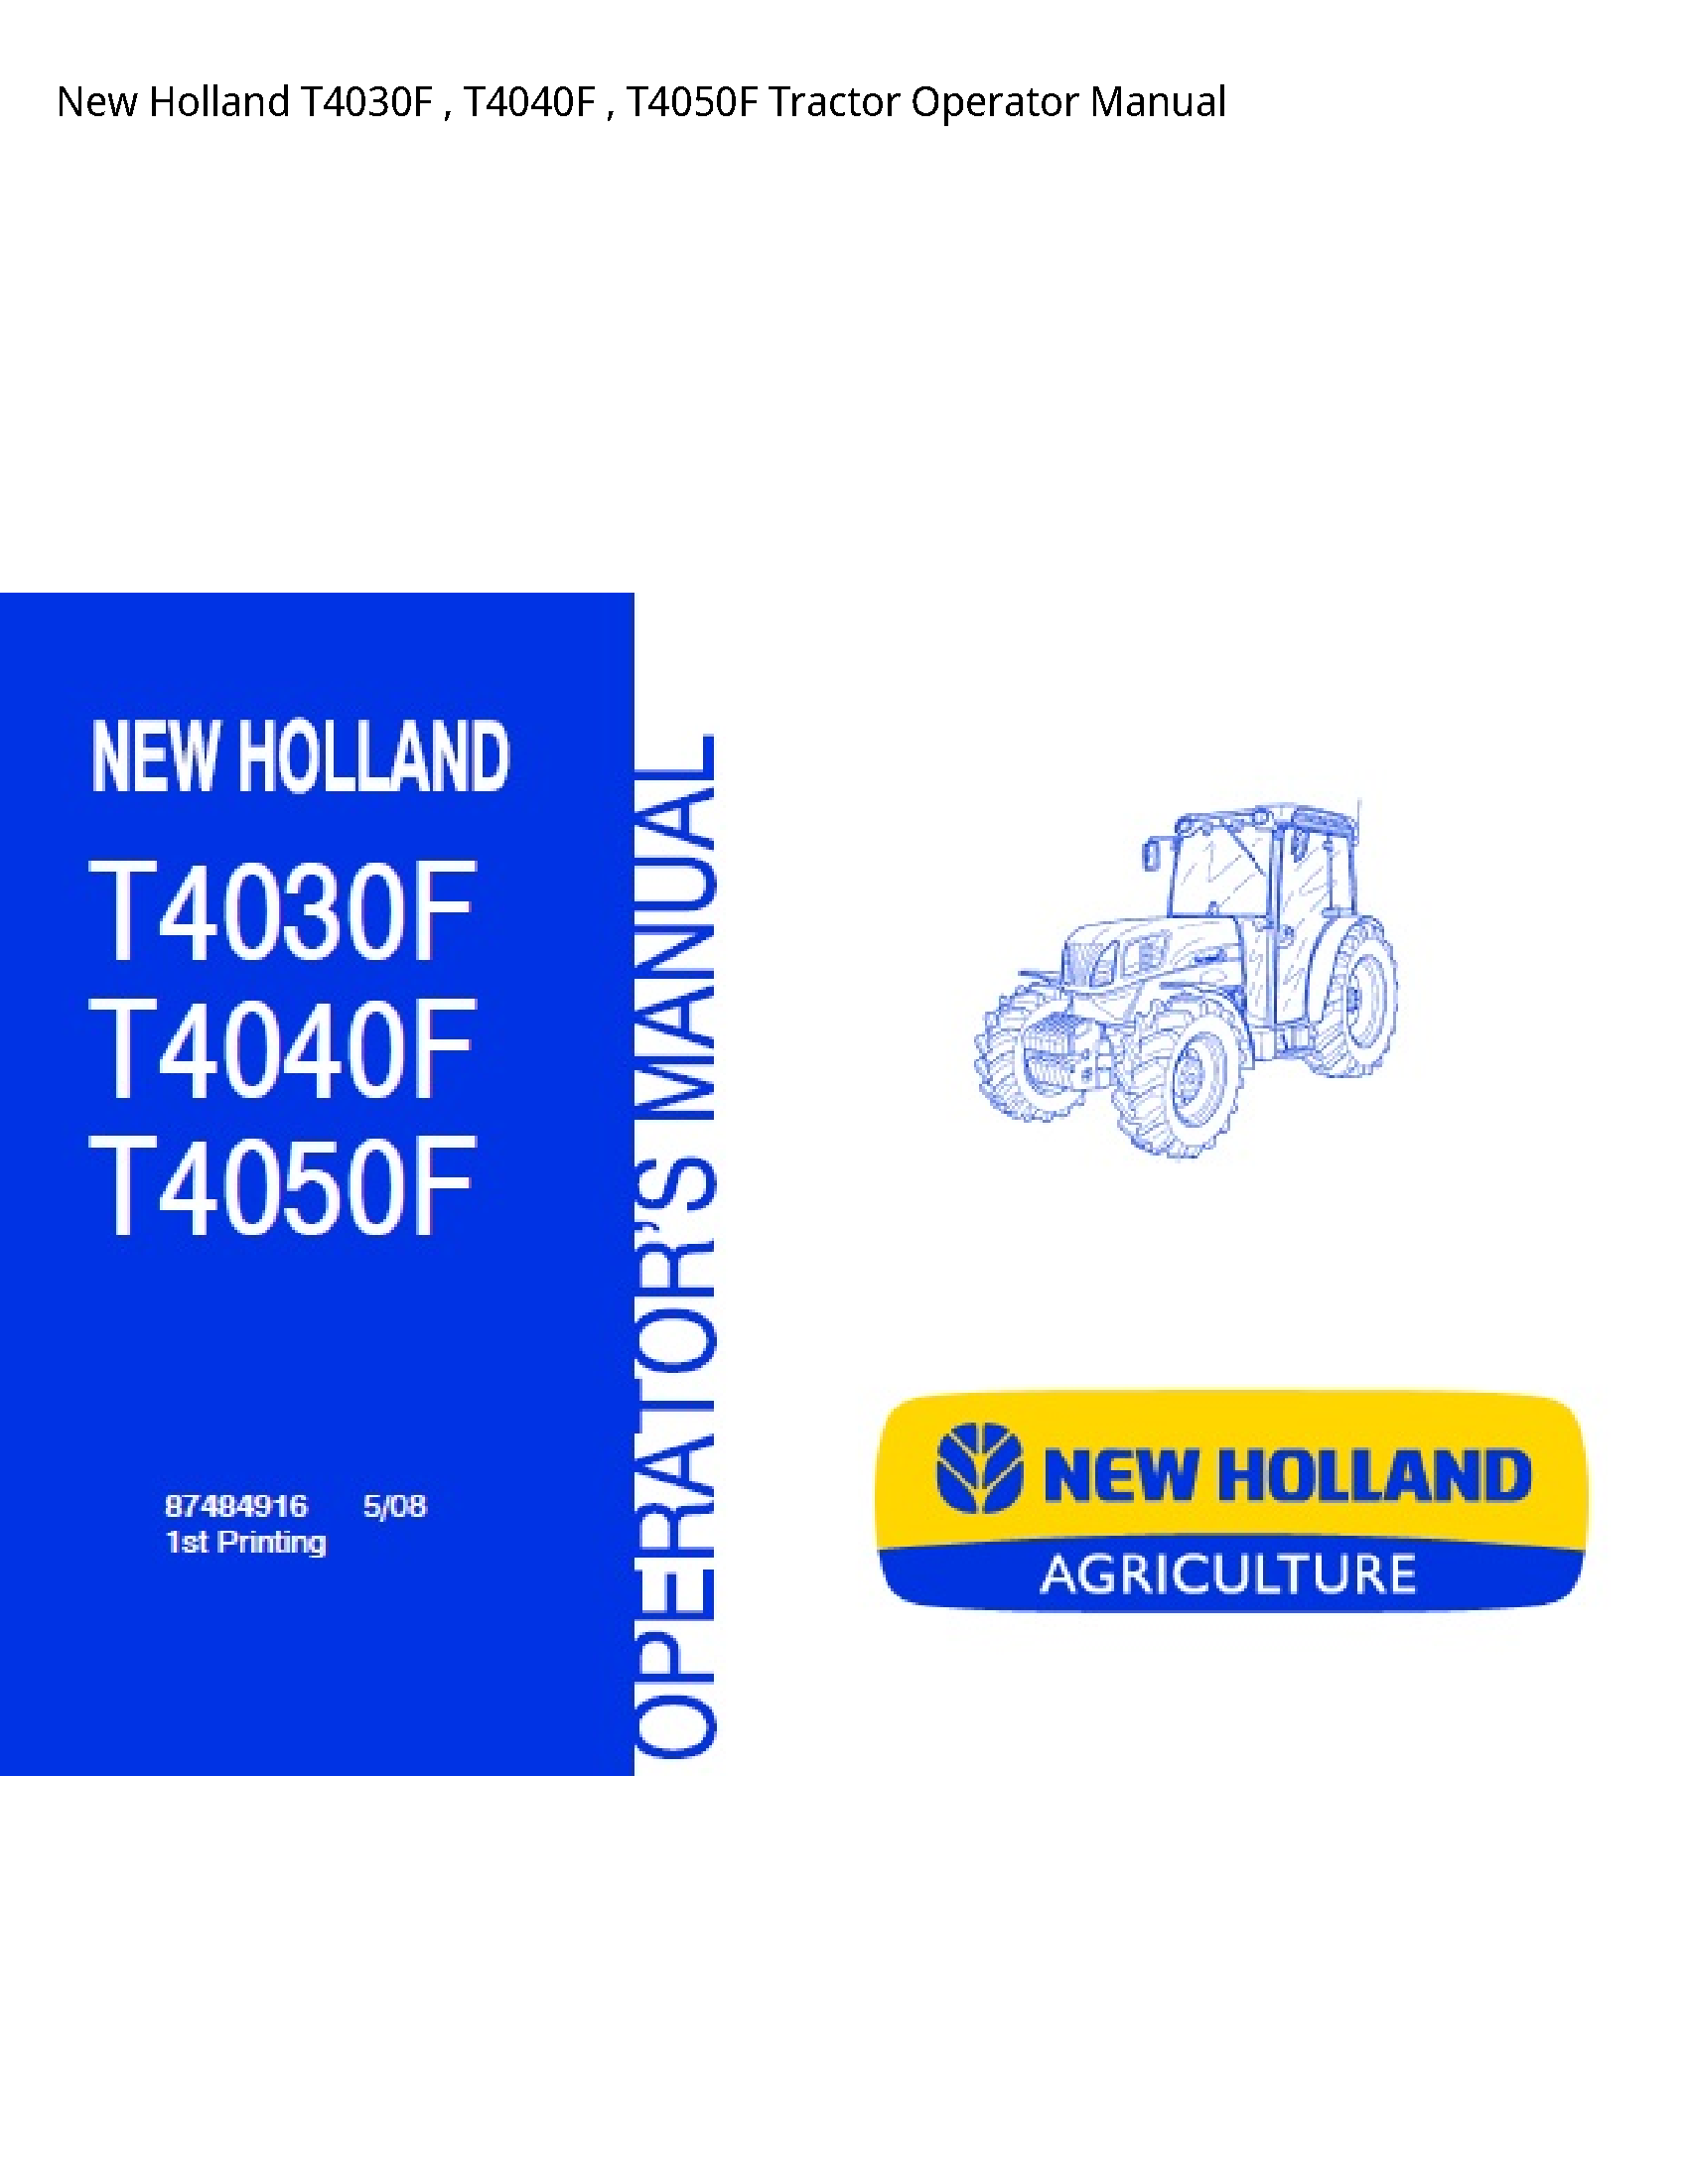 New Holland T4030F Tractor Operator manual